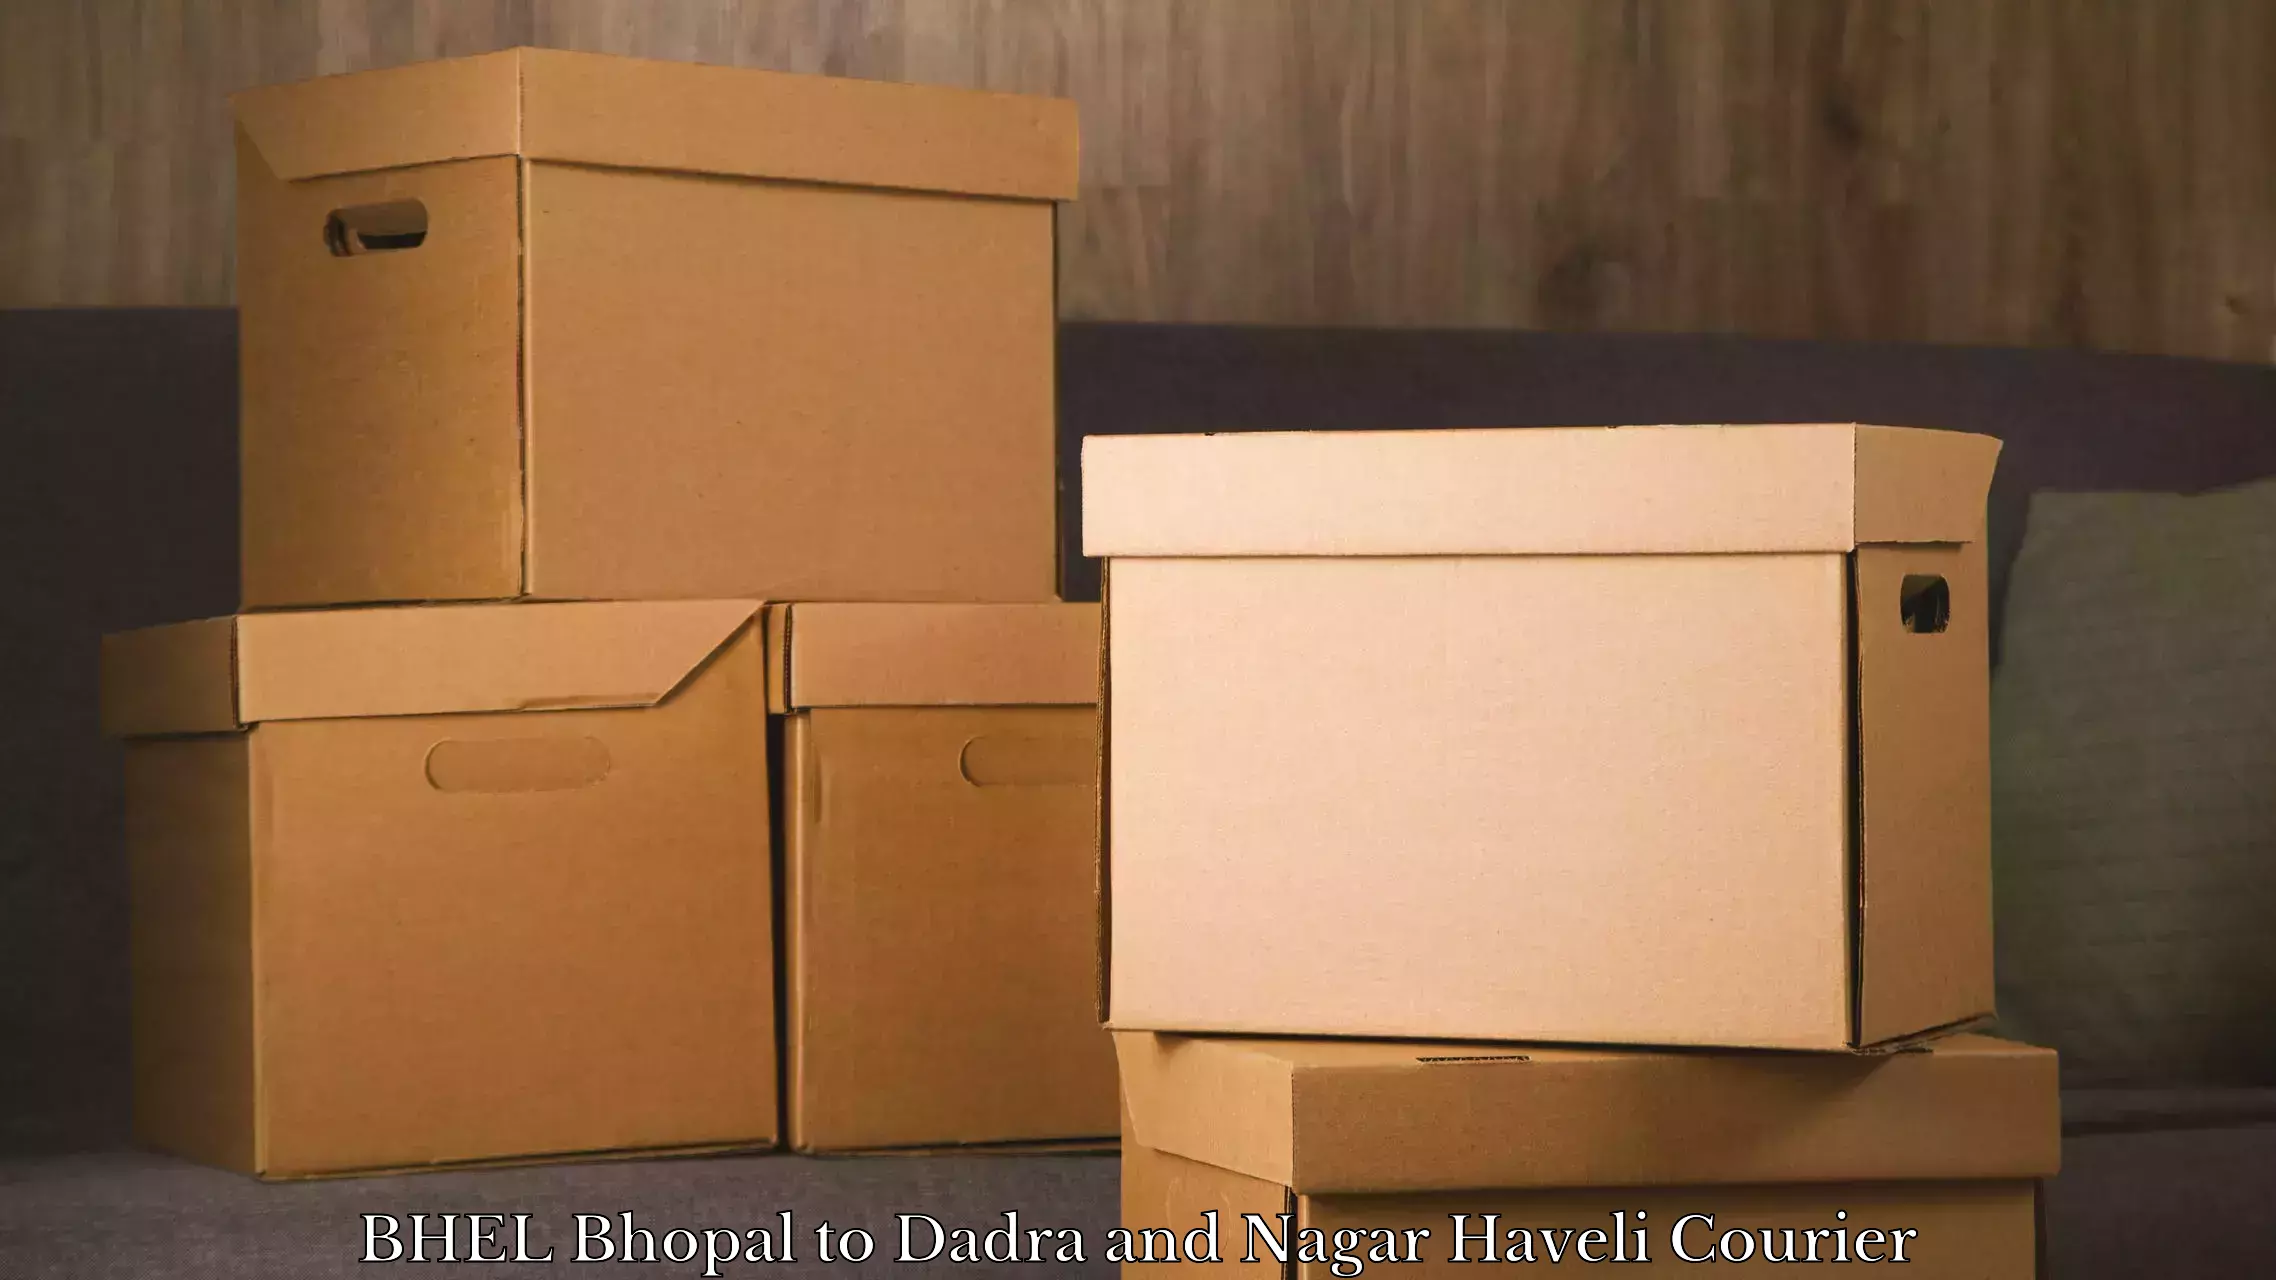 Luggage delivery app BHEL Bhopal to Dadra and Nagar Haveli